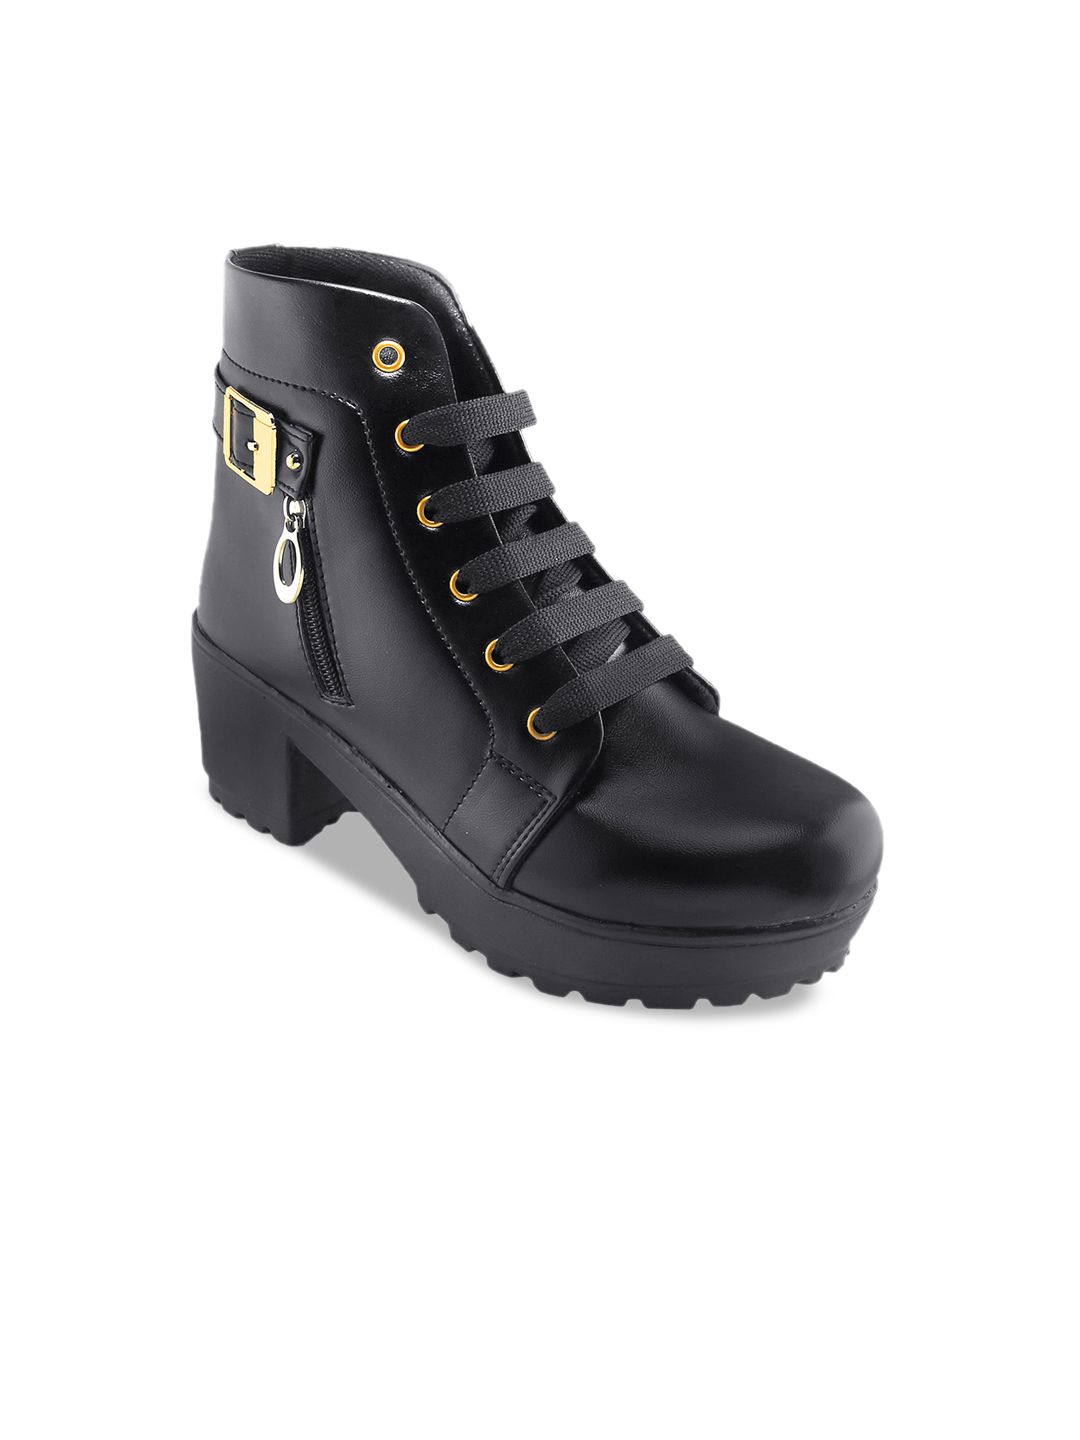 BOOTCO Women Black Solid Boots Price in India